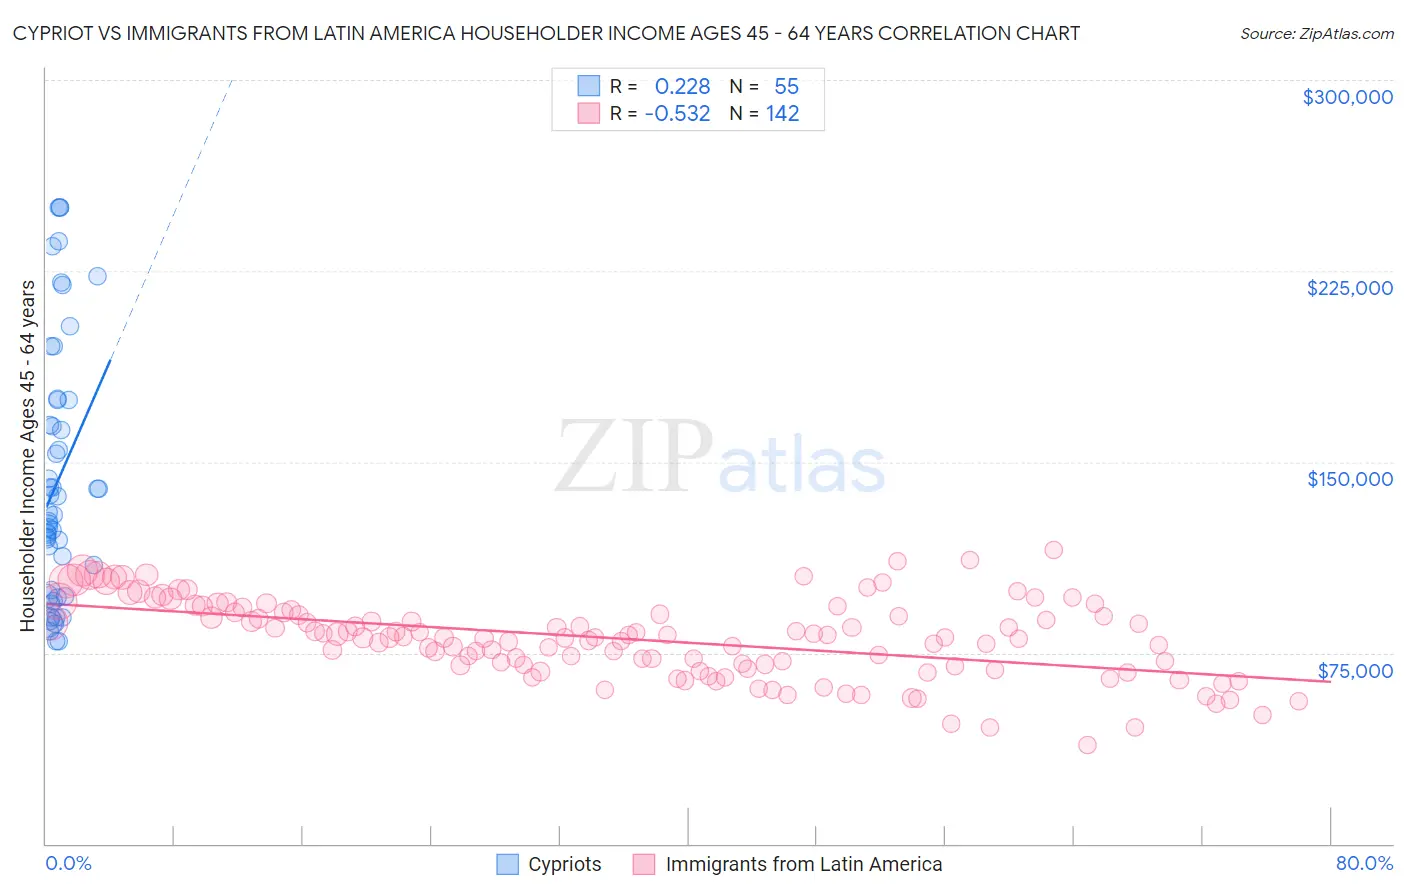 Cypriot vs Immigrants from Latin America Householder Income Ages 45 - 64 years